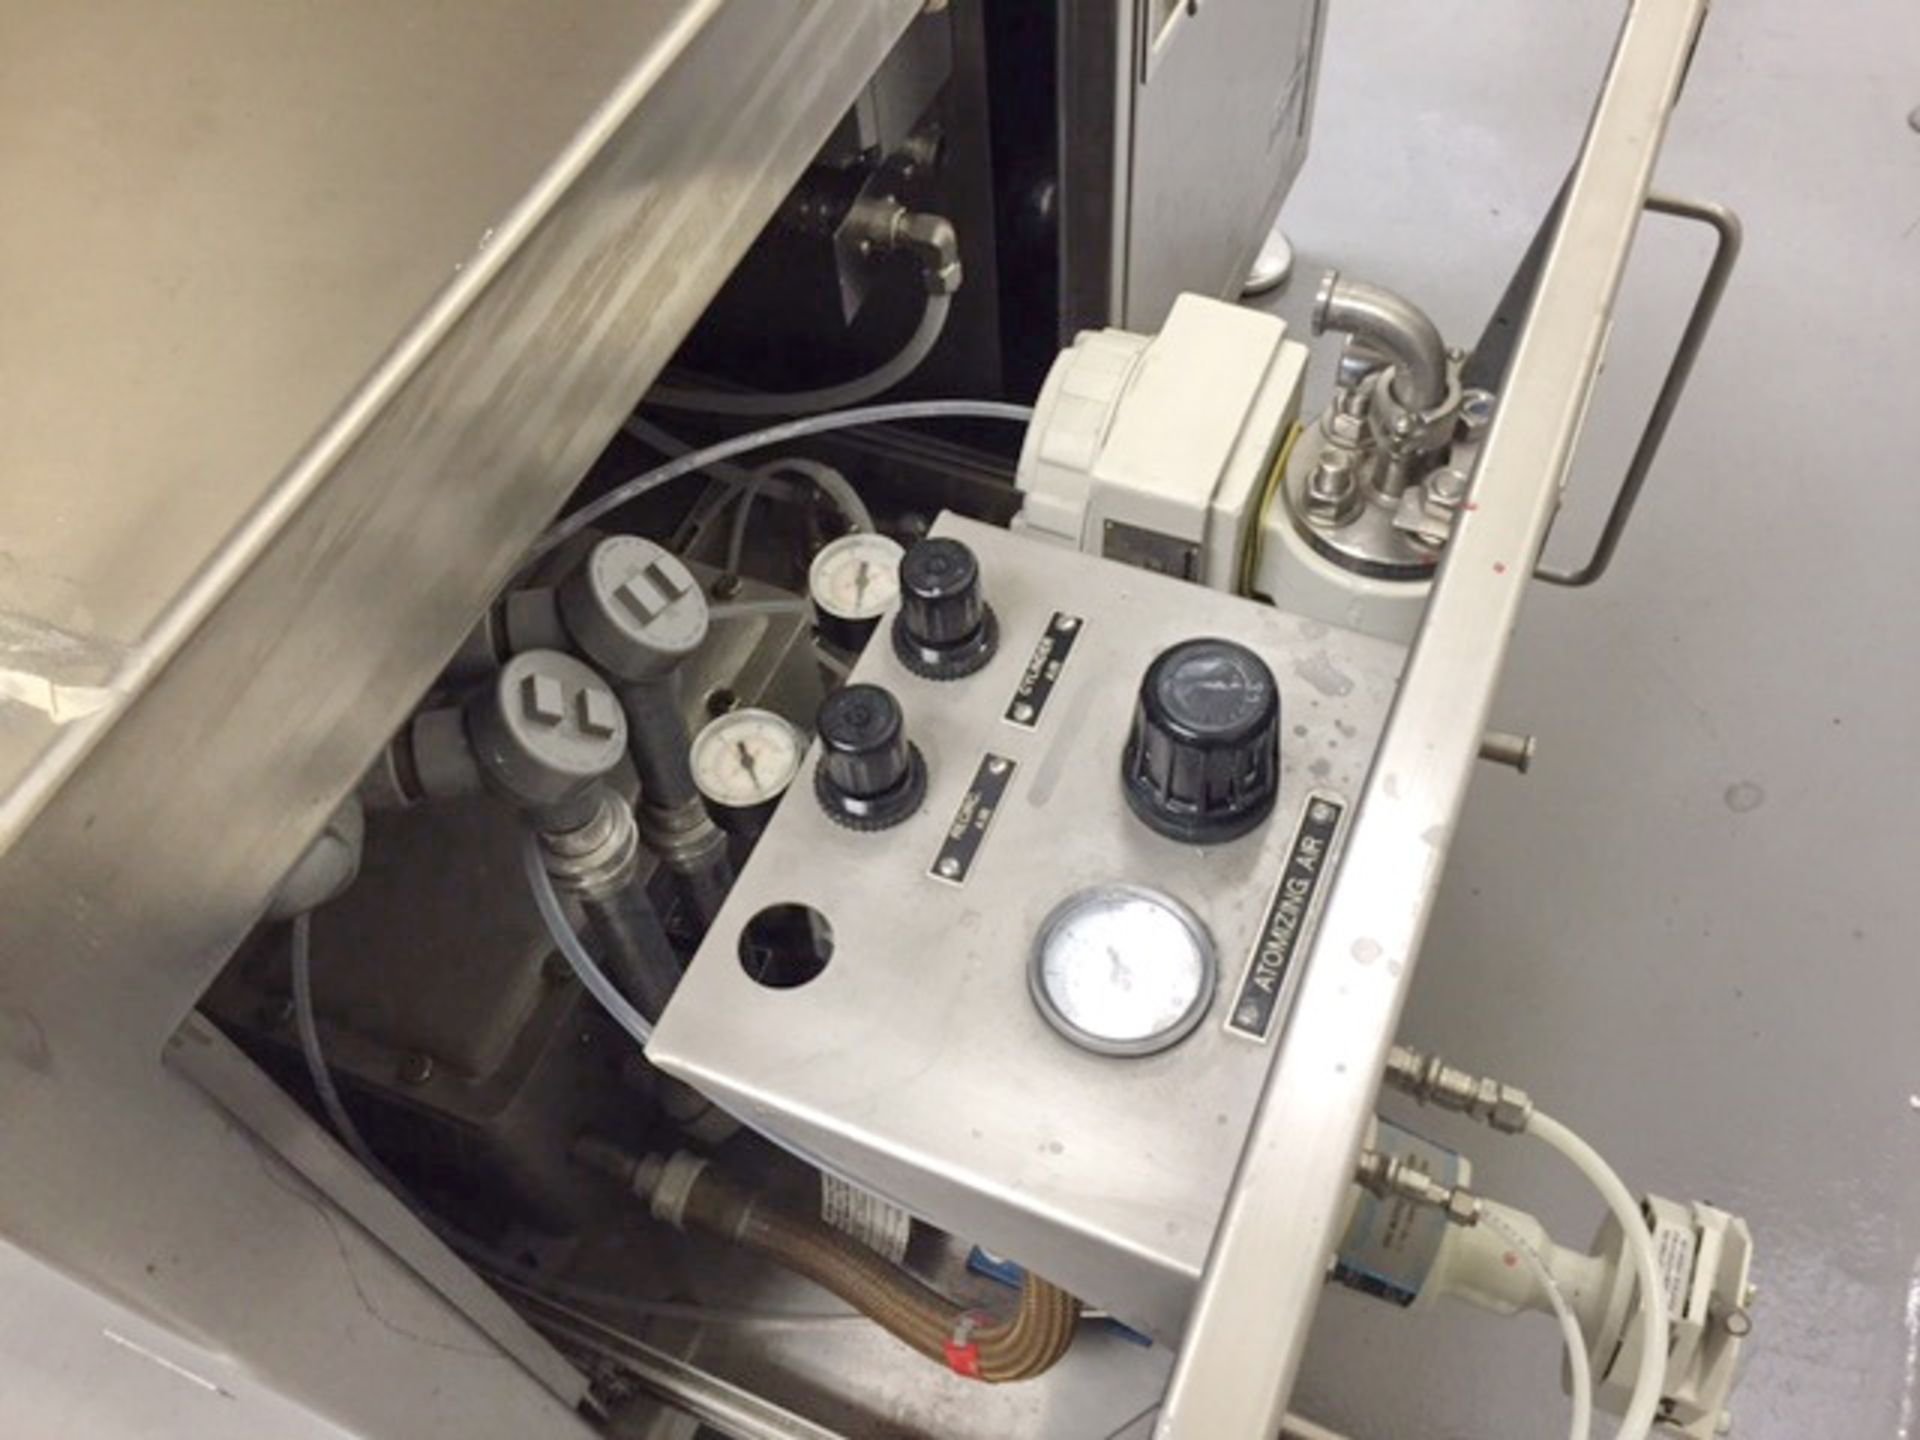 Thomas XR Perforate Interchangeable Pan Coating System rated for solvents, Model Compulab 24 - Image 8 of 23